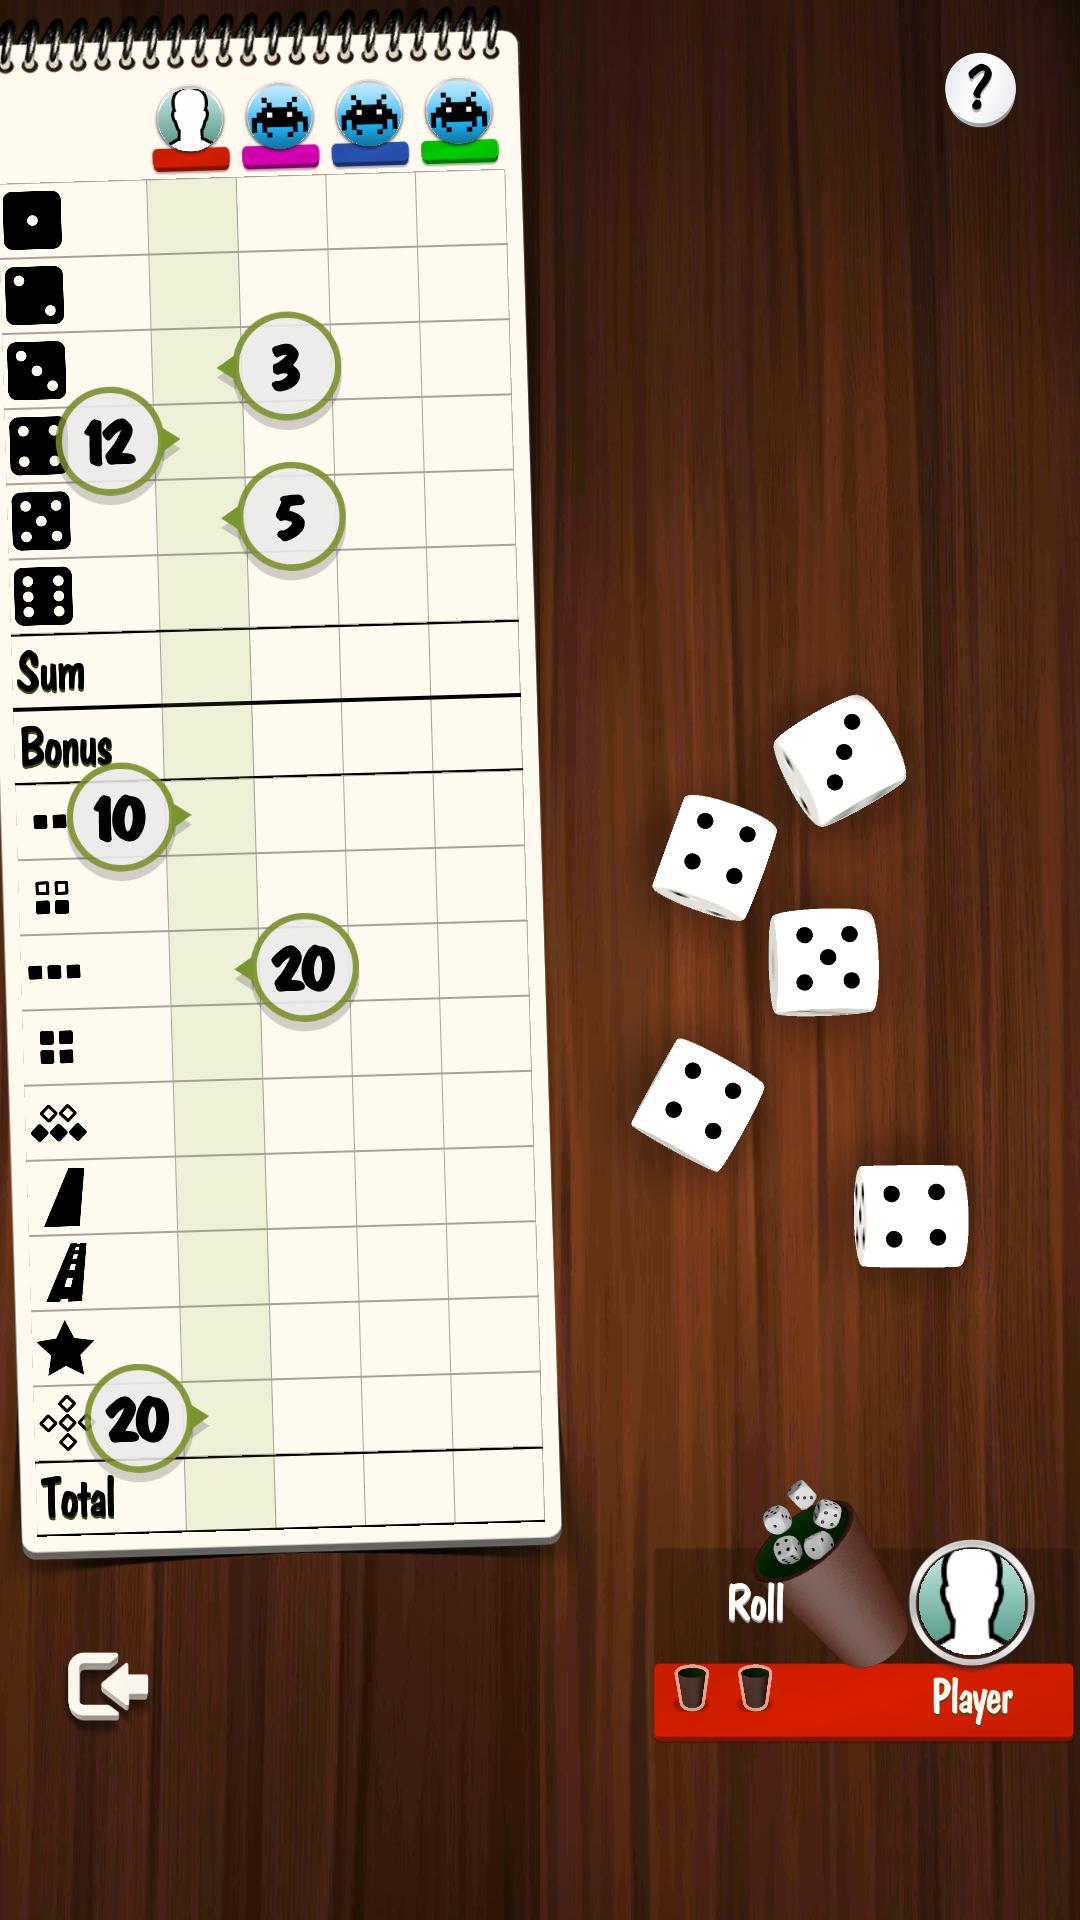 Yatzy Offline and Online - free dice game 3.3.4 Screenshot 3